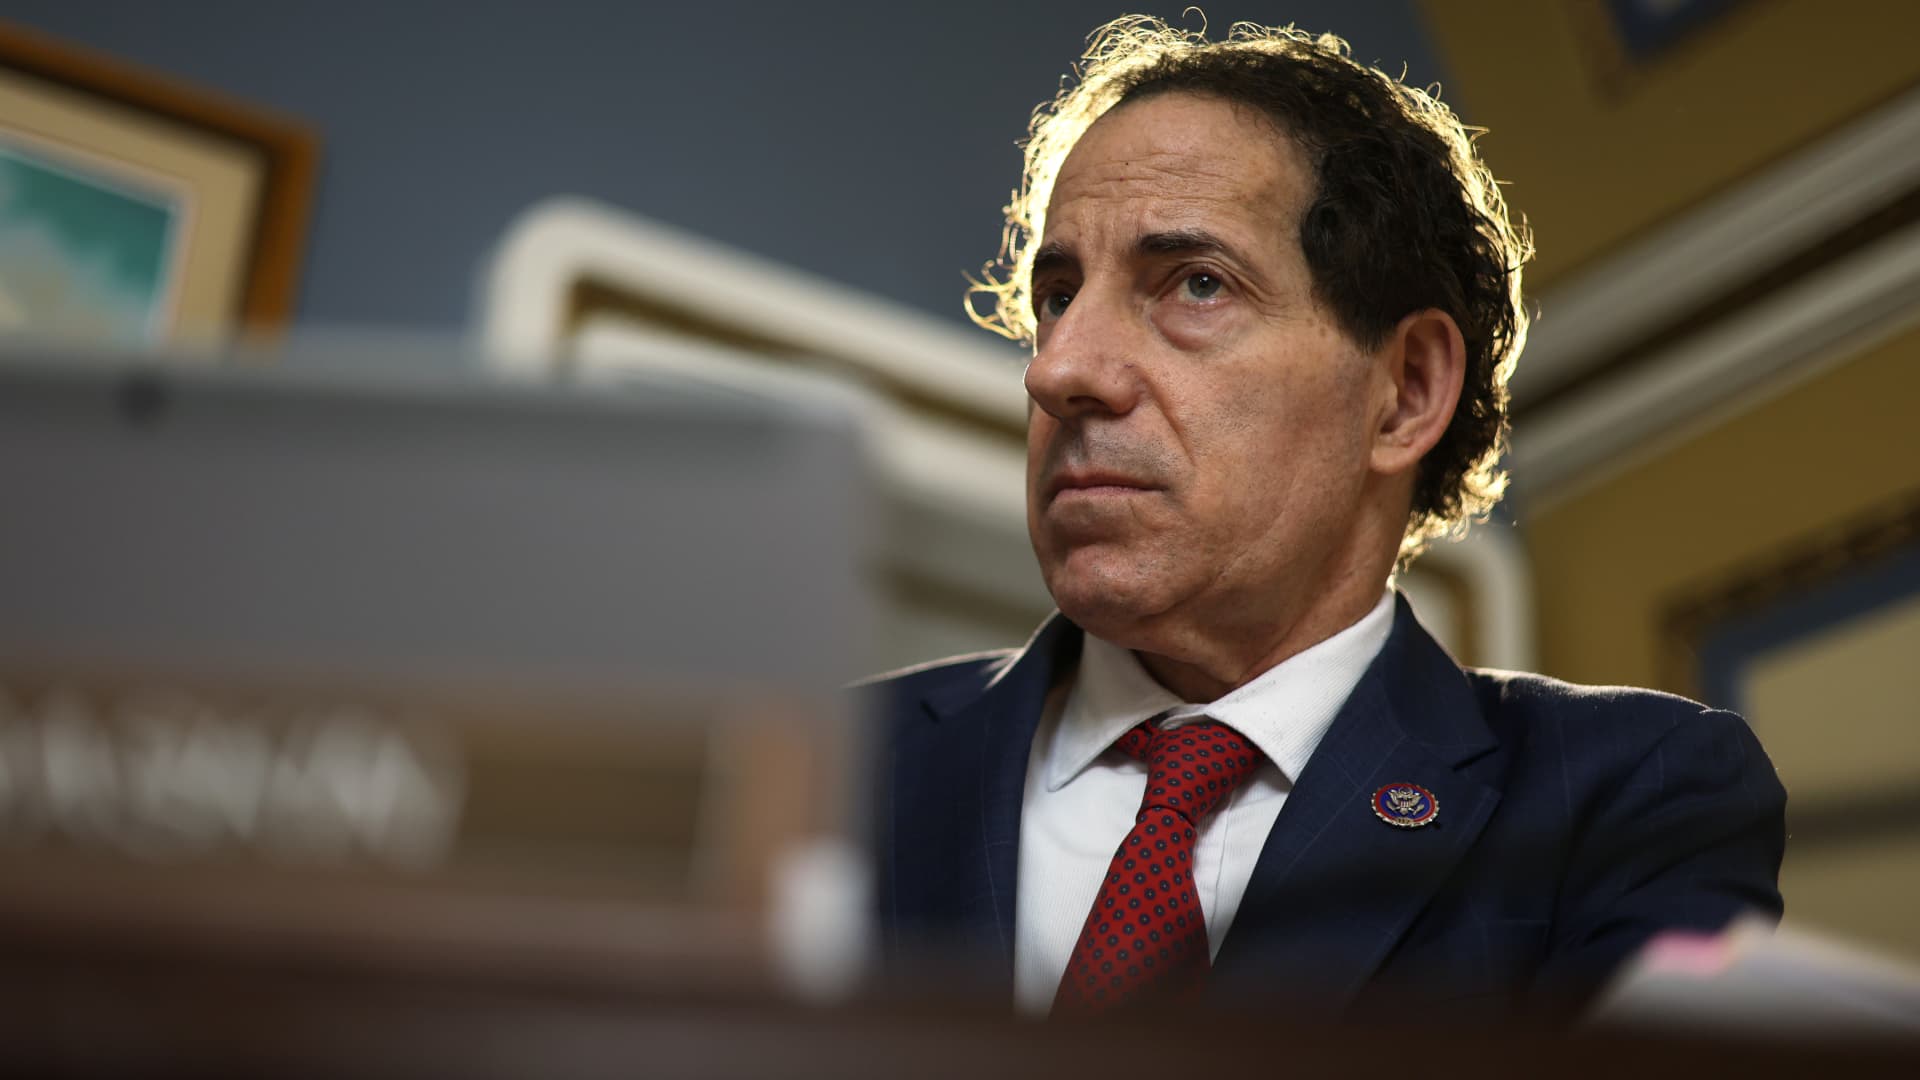 U.S. Rep. Jamie Raskin (D-MD) listens during a meeting of the House Rules Committee at the U.S. Capitol June 7, 2022 in Washington, DC.